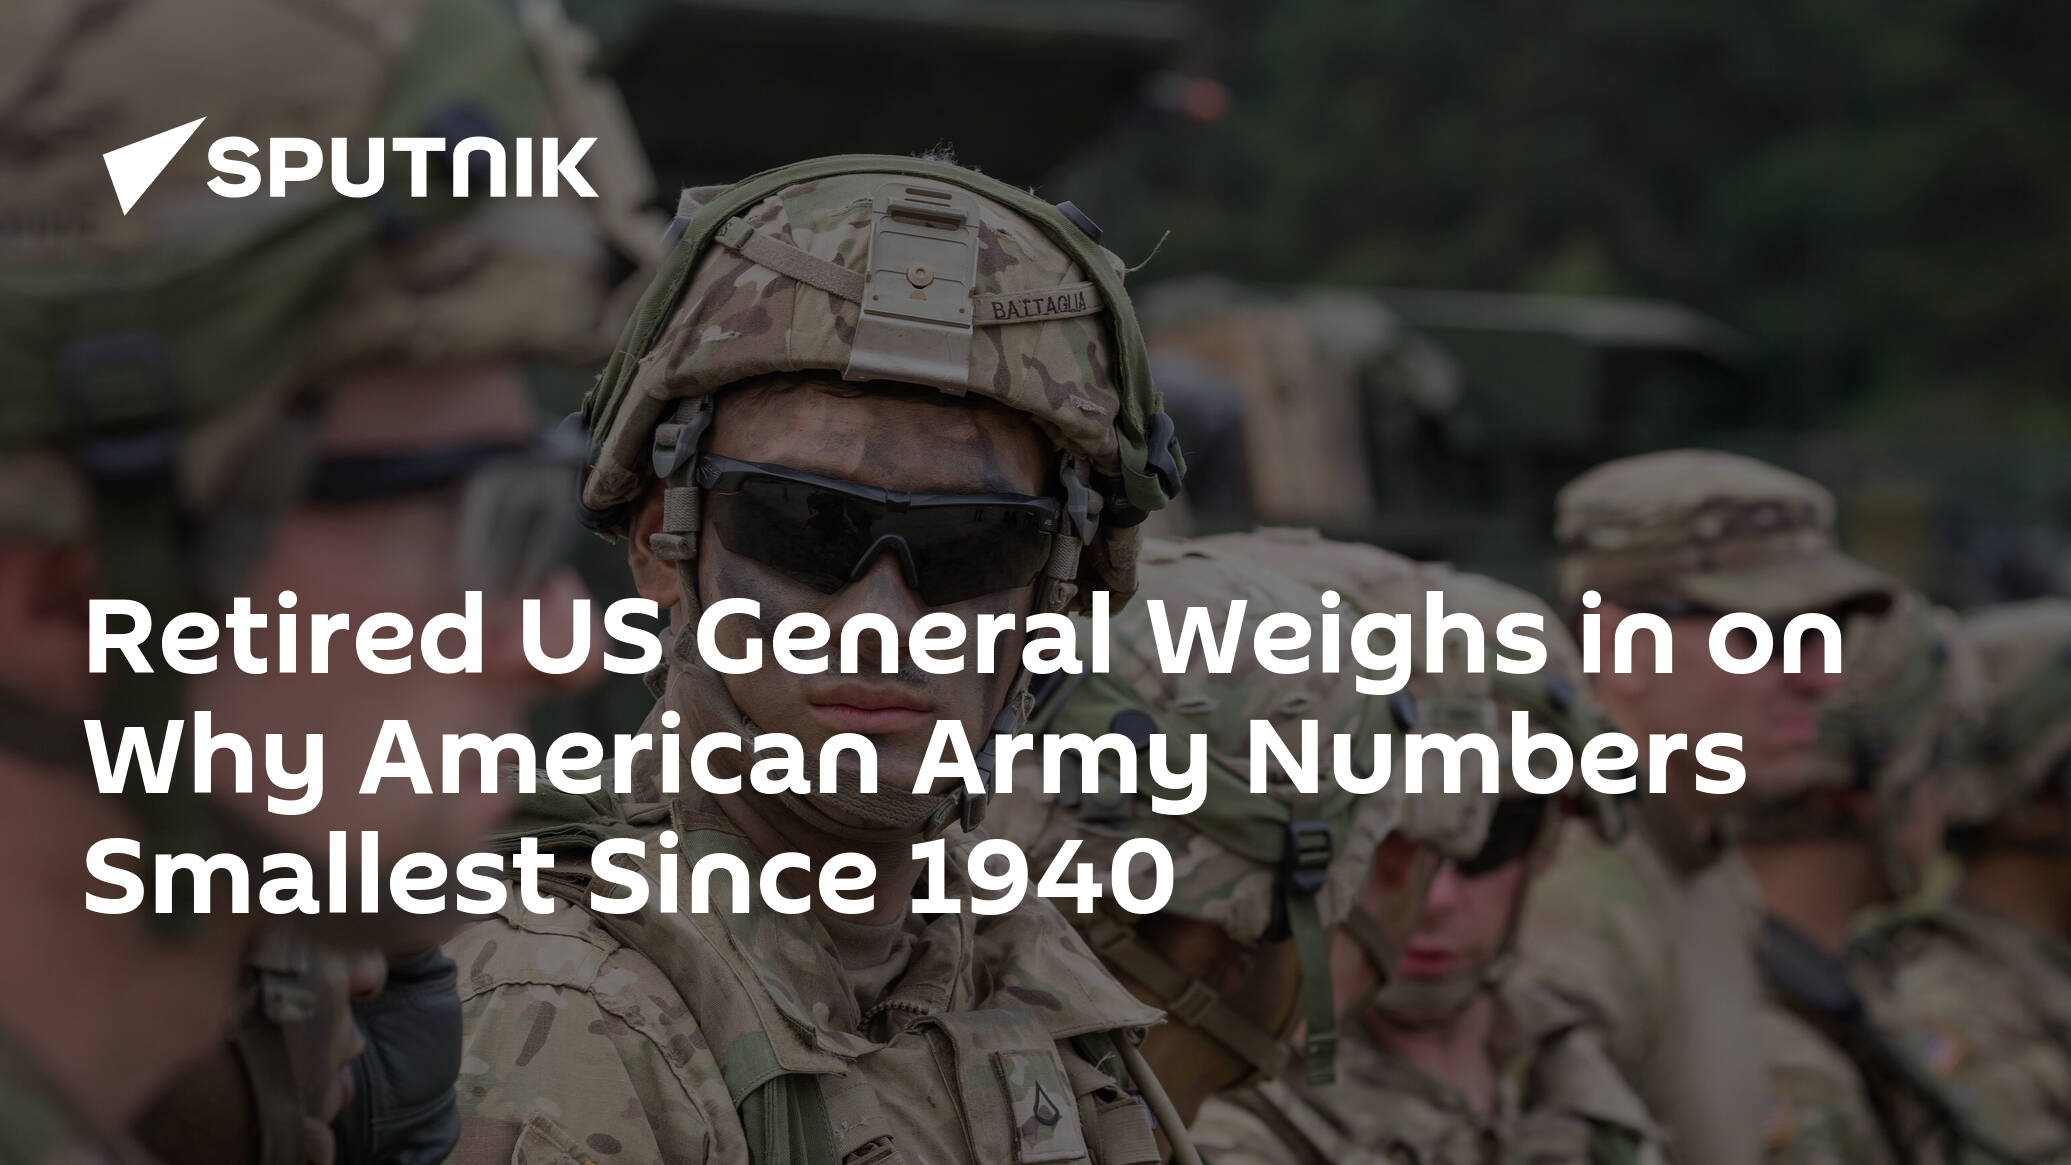 Retired US General Weighs in on Why American Army Number Smallest Since 1940